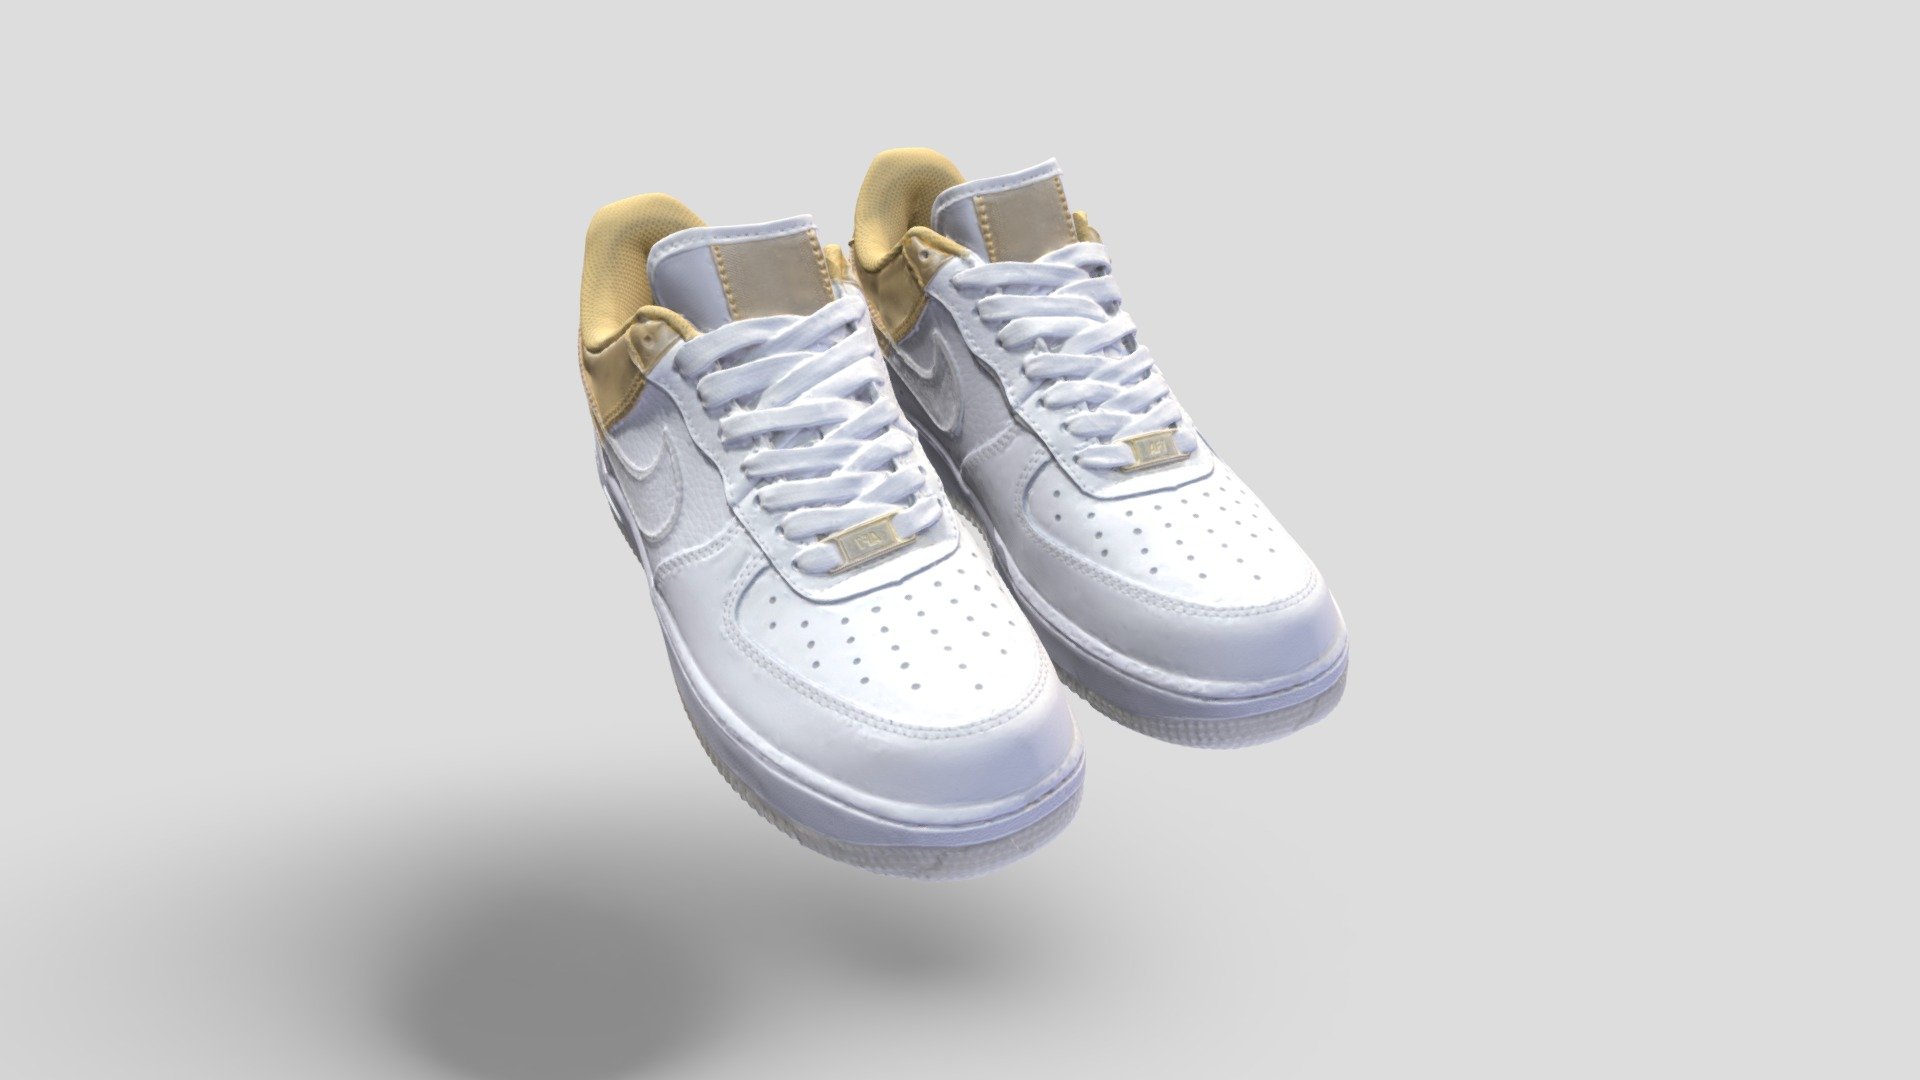 Highly detailed, photorealistic 3d scanned model  Nike Air force white
The model is cleaned up and retopologized and ready to use! 
The set includes a pair of sneakers.

&mdash;What's included&mdash; 
4k texture maps 
Each sneaker has 200k polygons 
All the models come in FBX/OBJ File formats.

*Please note that this is a photo-scanned model, and it may not be a 100% perfect model 3d model